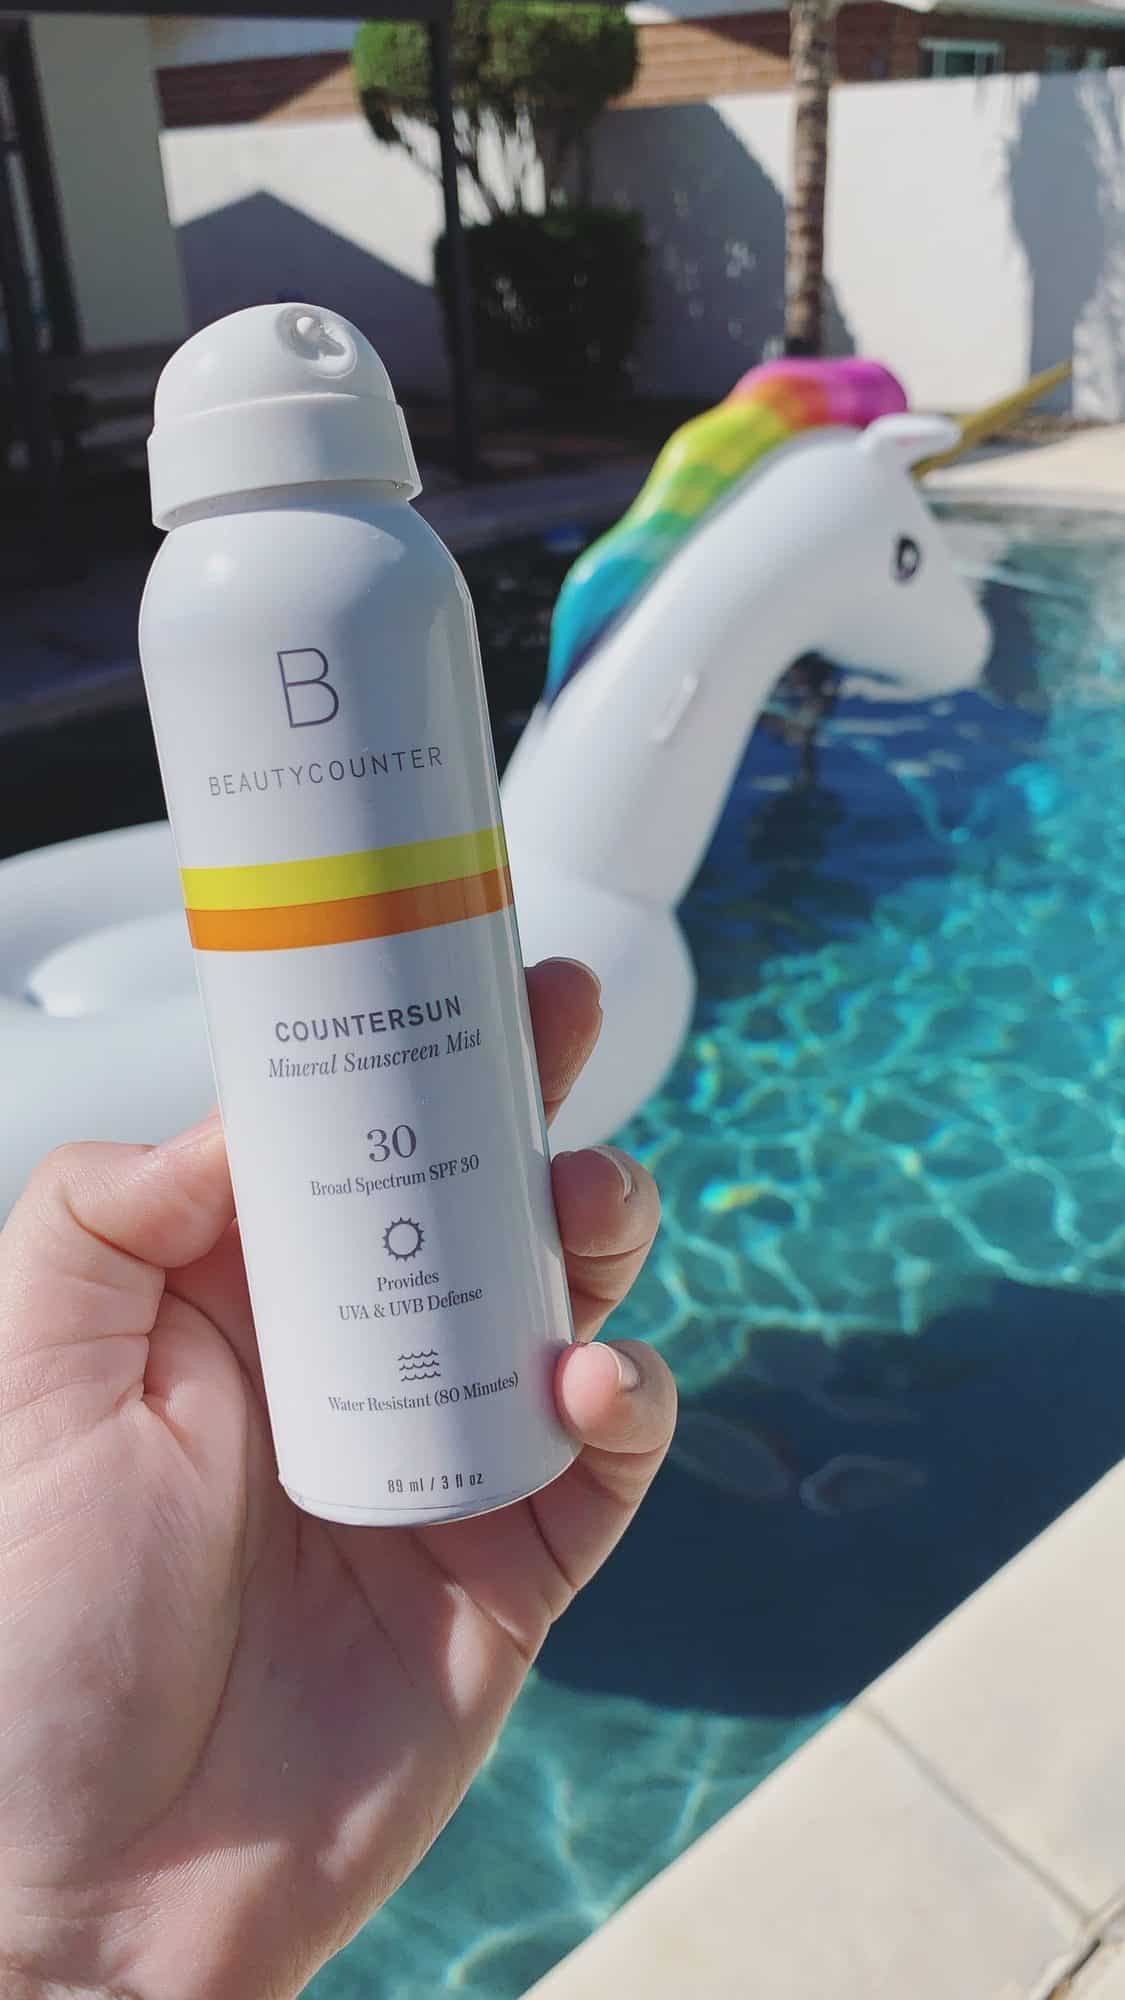 A hand holding a bottle of Countersun Mineral Sunscreen Spray in front of a pool with a large unicorn floaty in the background.